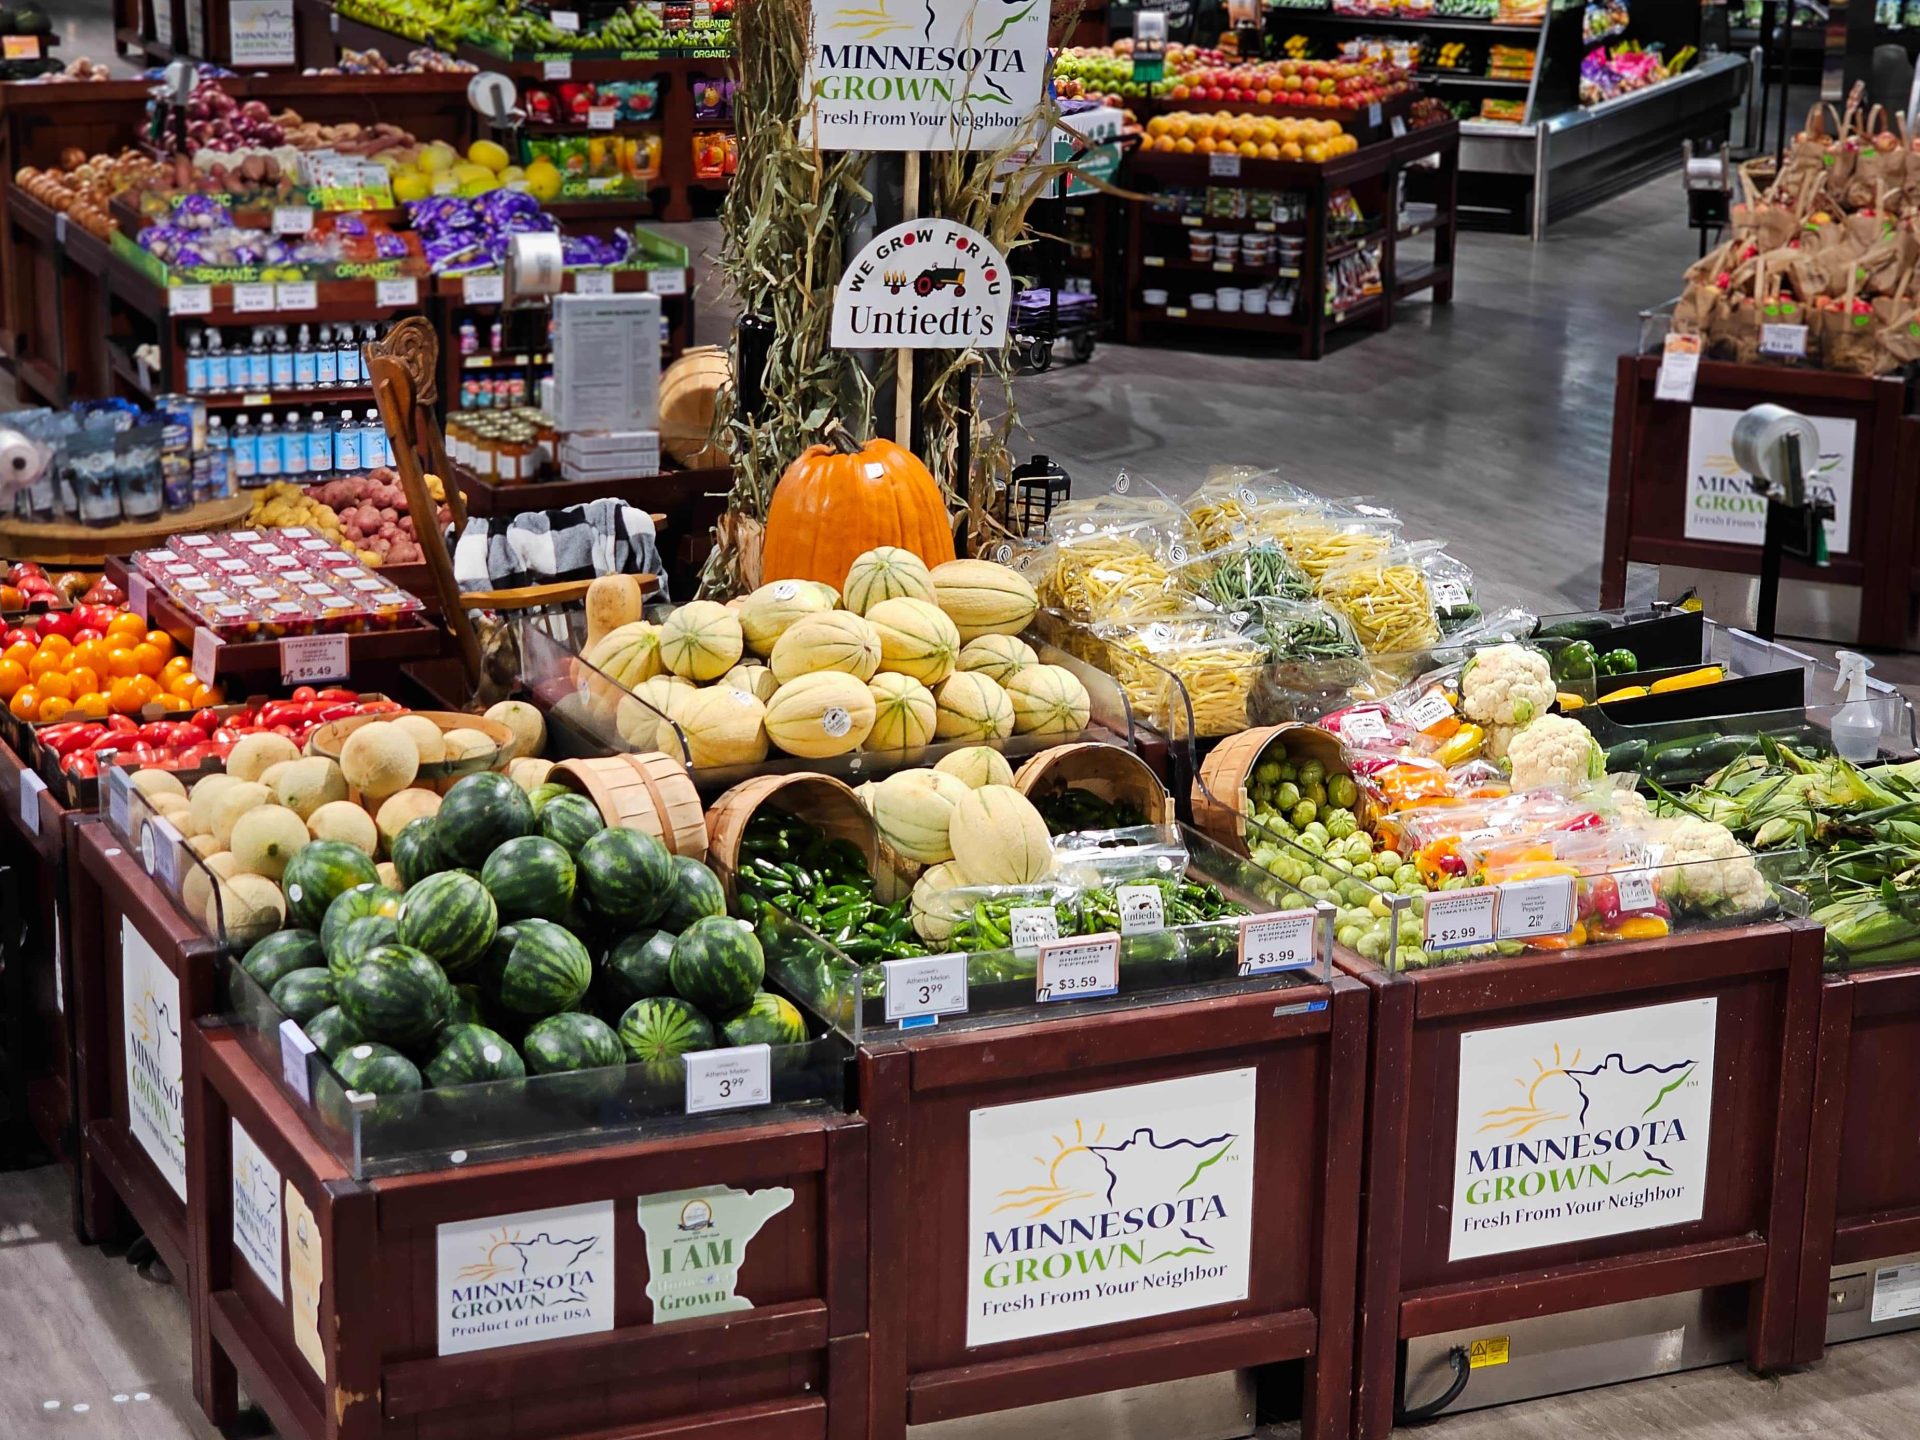 A grocery store produce display at Mackenthun's.